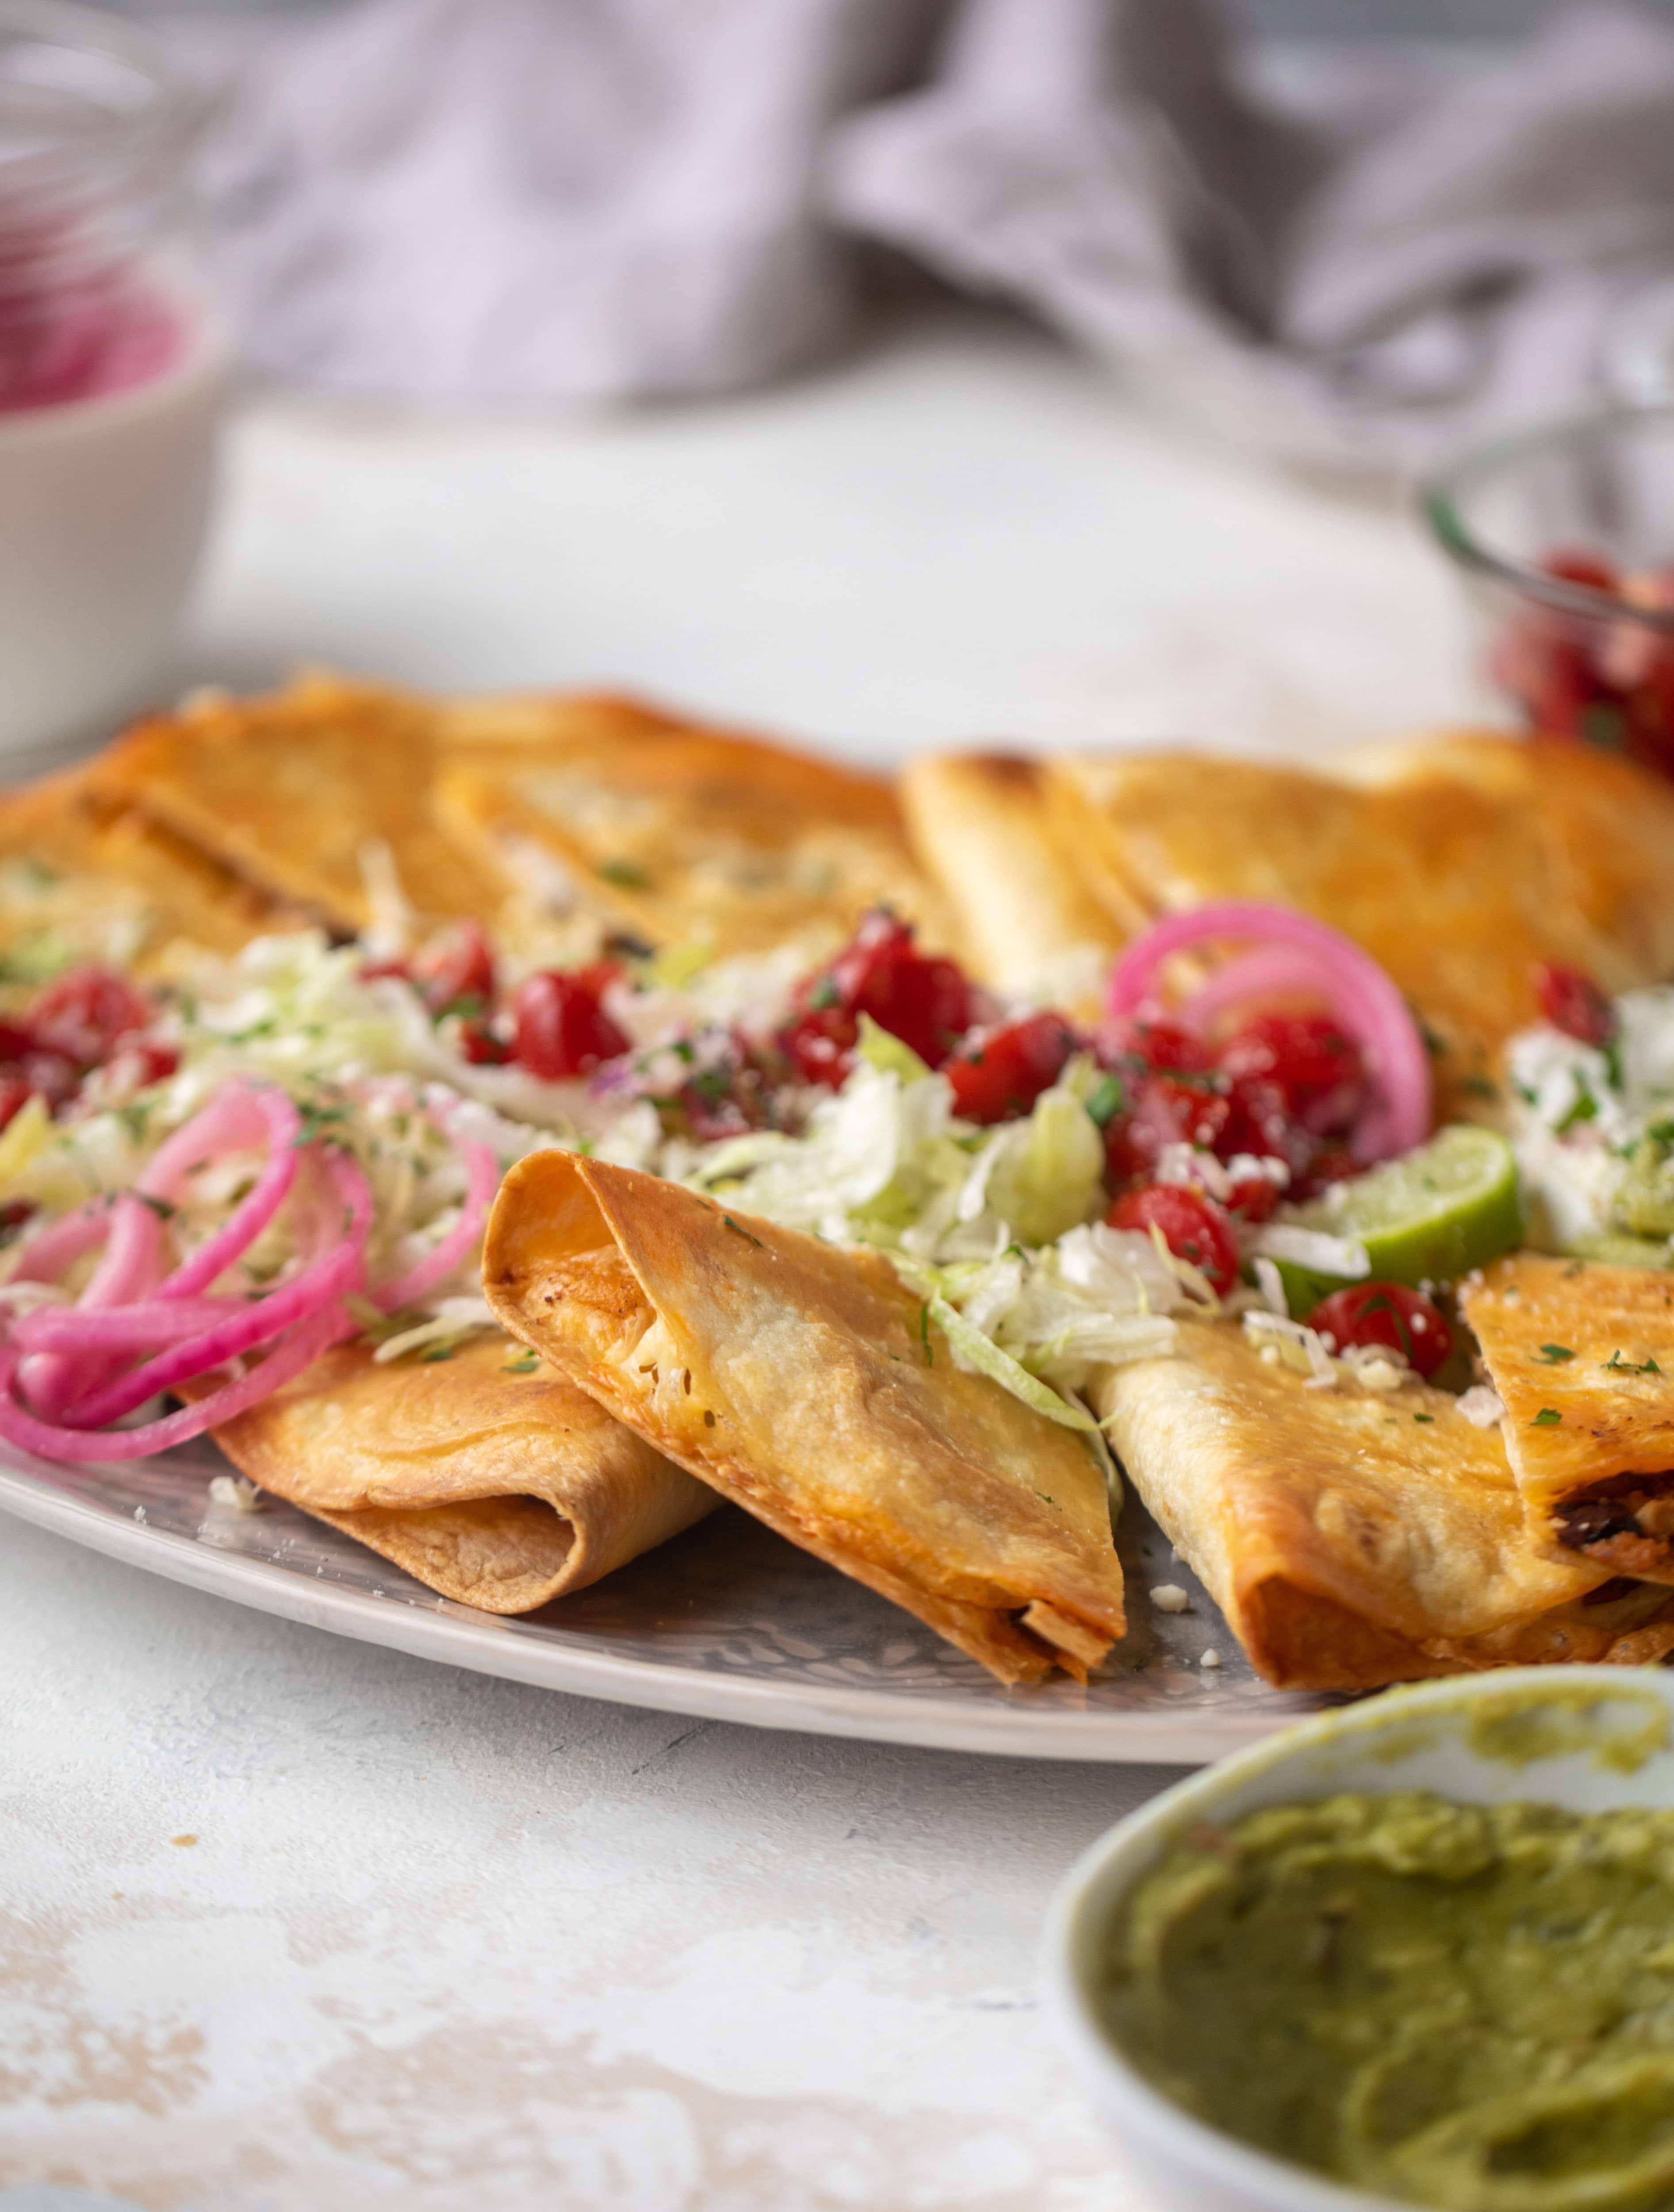 These crispy baked quesadillas will change your life! Make a big batch at once using pantry ingredients and your favorite cheese. 